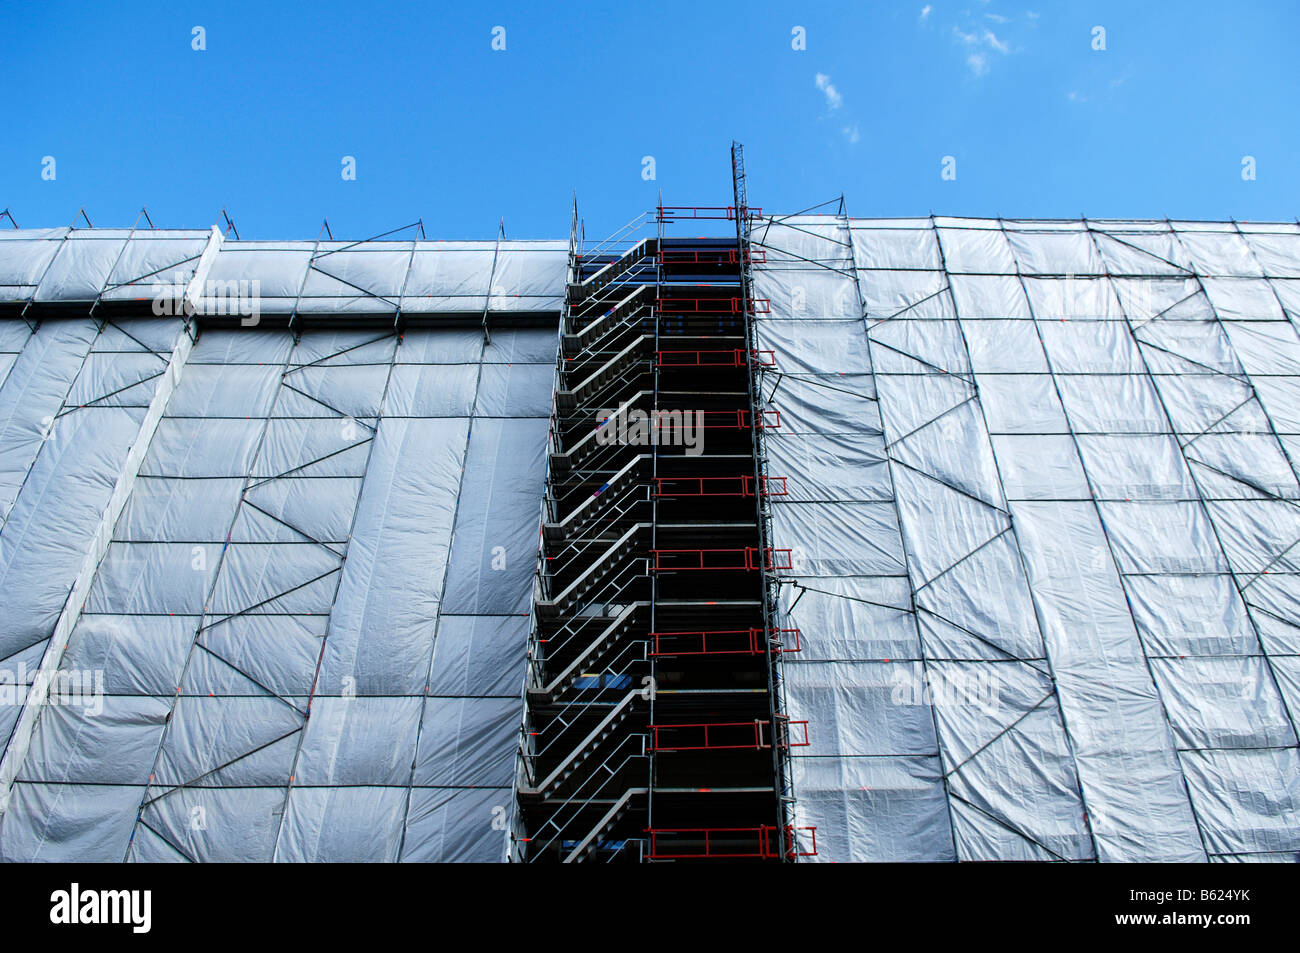 Scaffolded building hung with a tarpaulin, Berlin, Germany, Europe Stock Photo